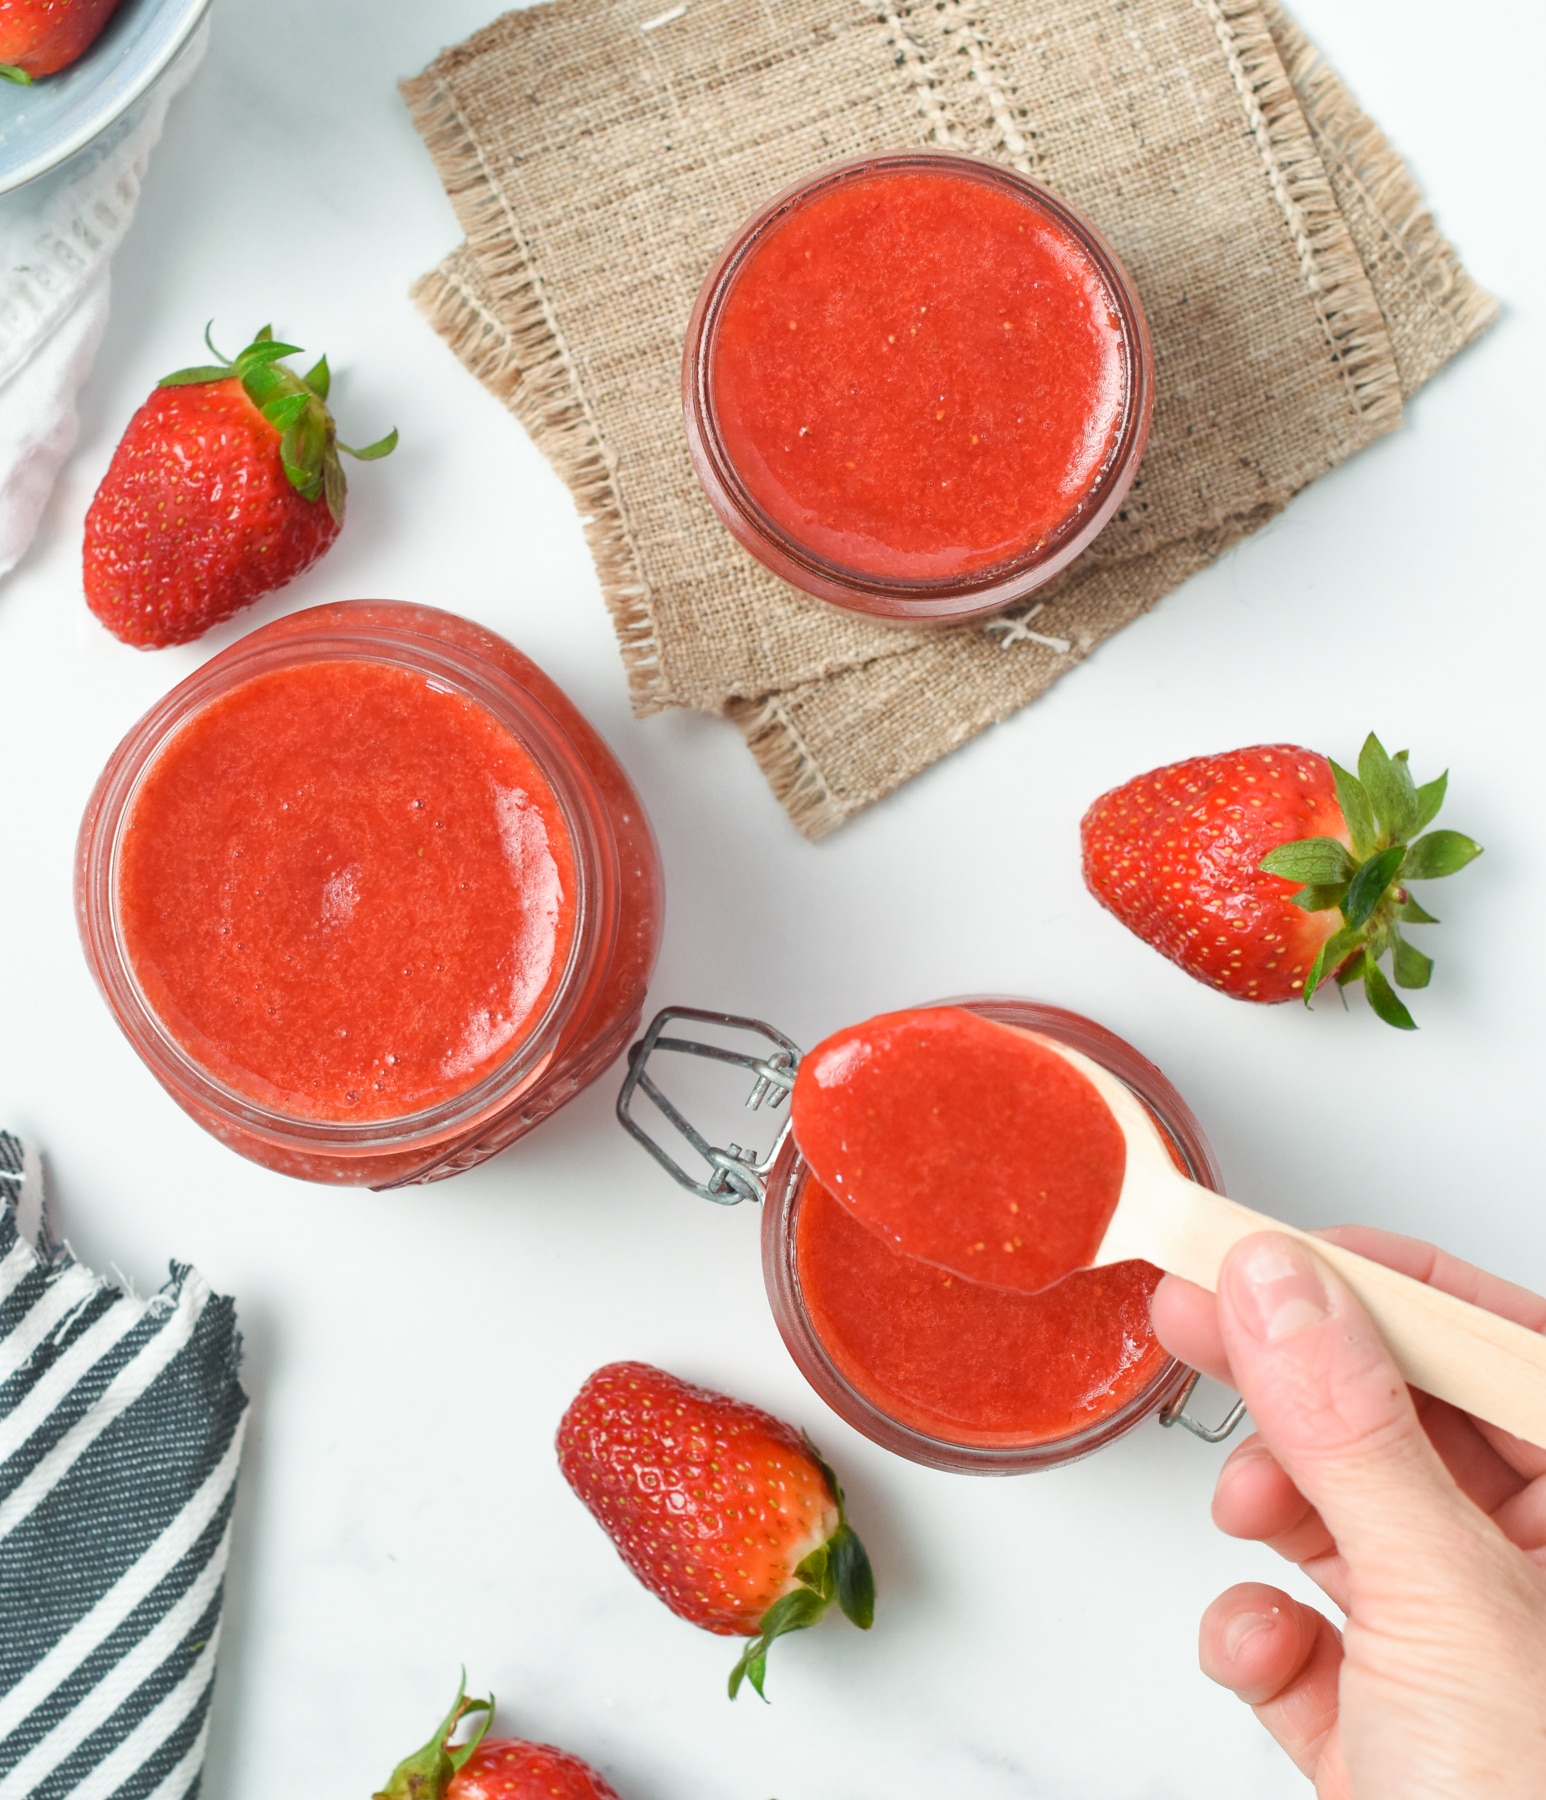 Strawberry Puree For drinks or for babies busy little kiddies